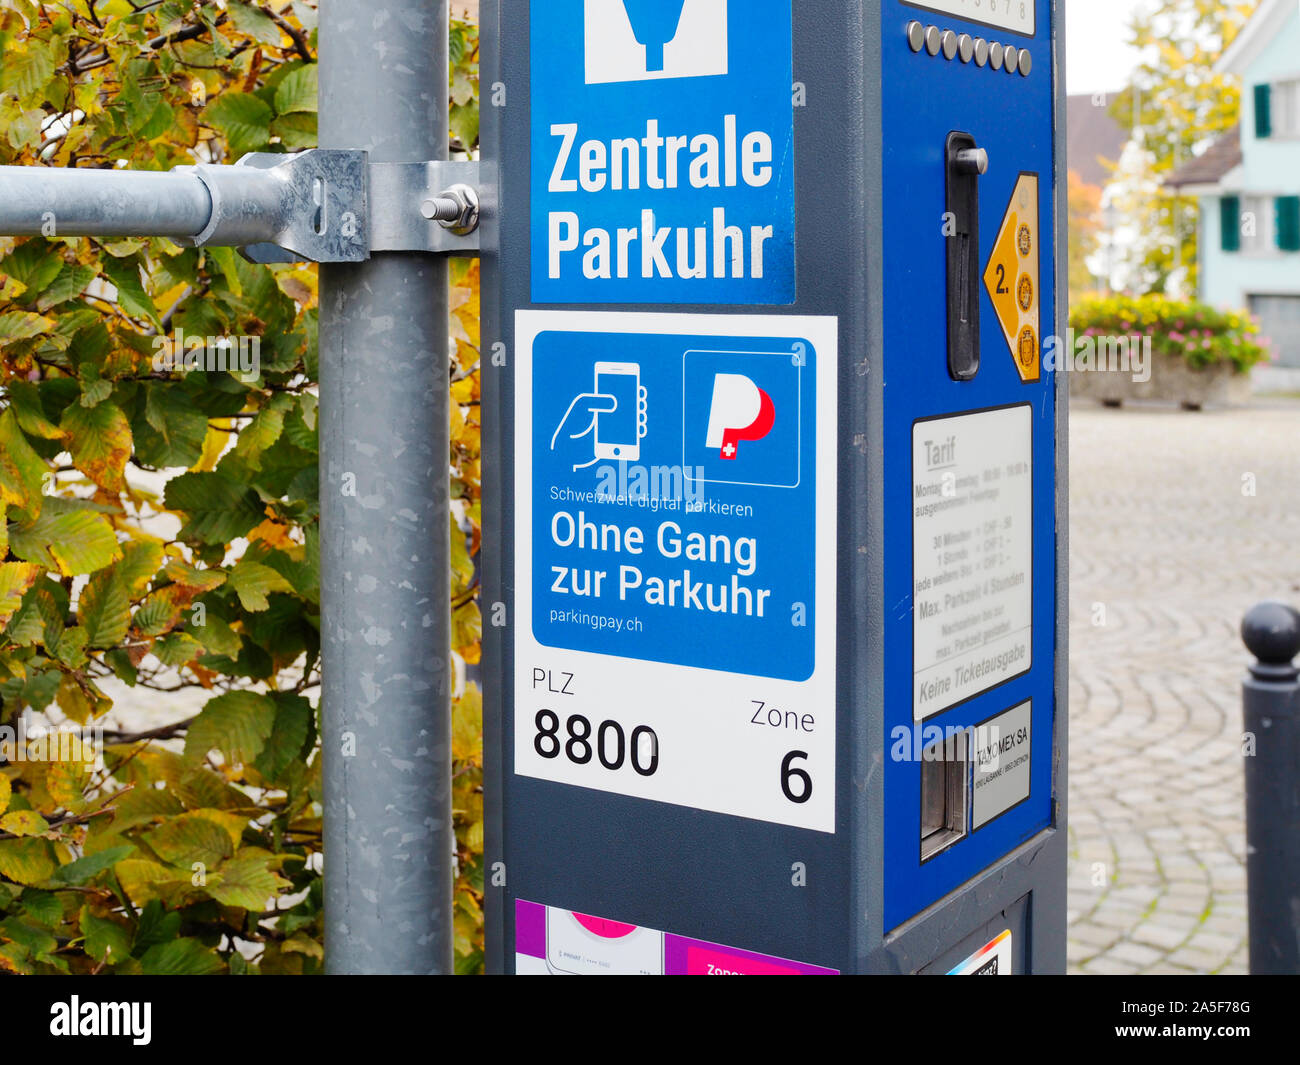 Zentrale Parkuhr in Thalwil mit parkingpay-Hinweis Stock Photo